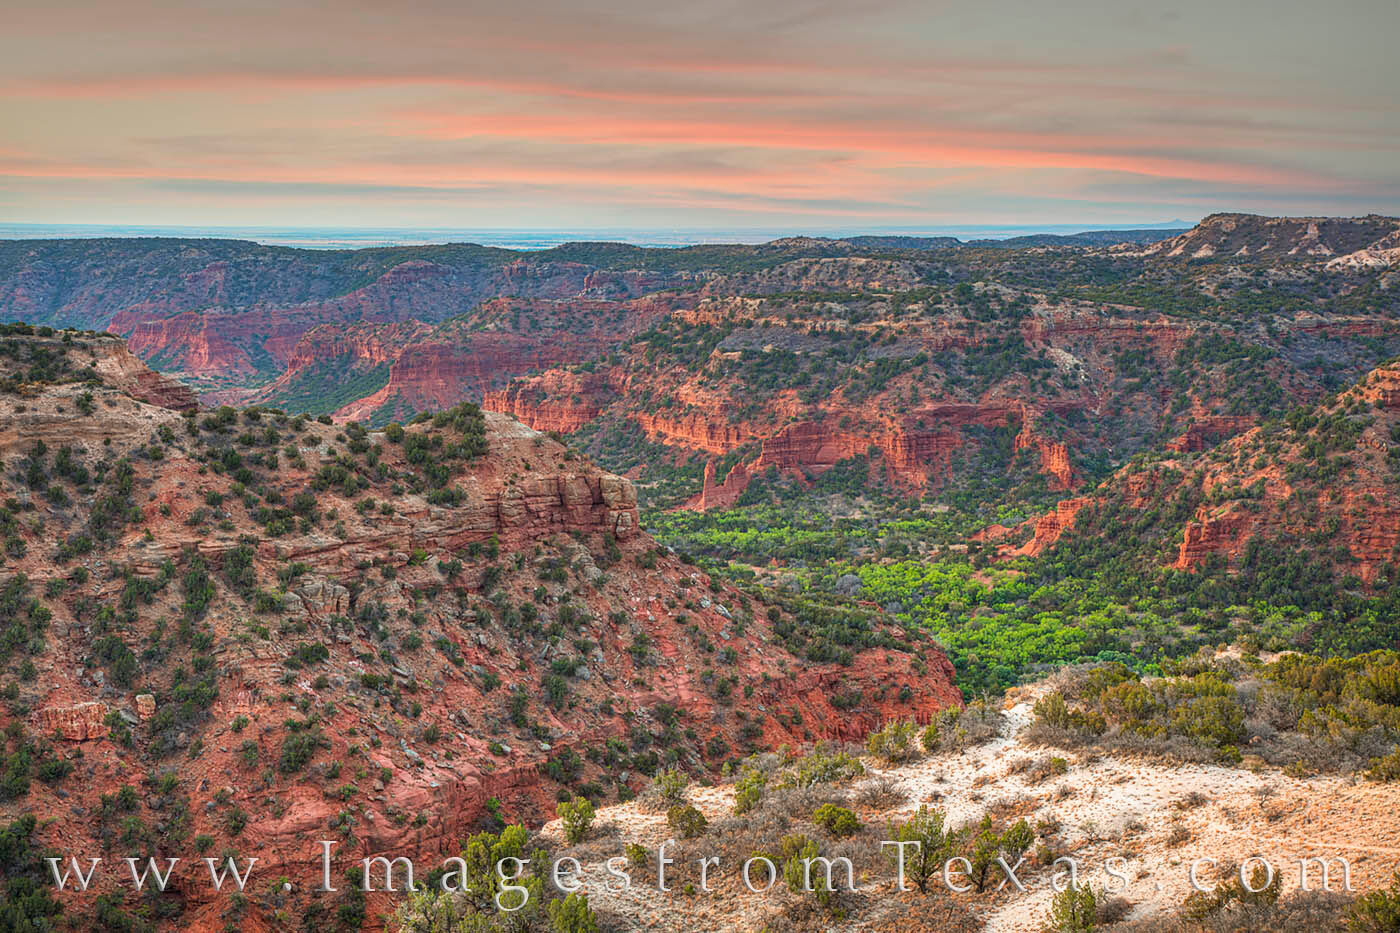 From high up on the South Prong Trail, the pastel colors of a spring sunrise filled the sky before fading again. Views of the...